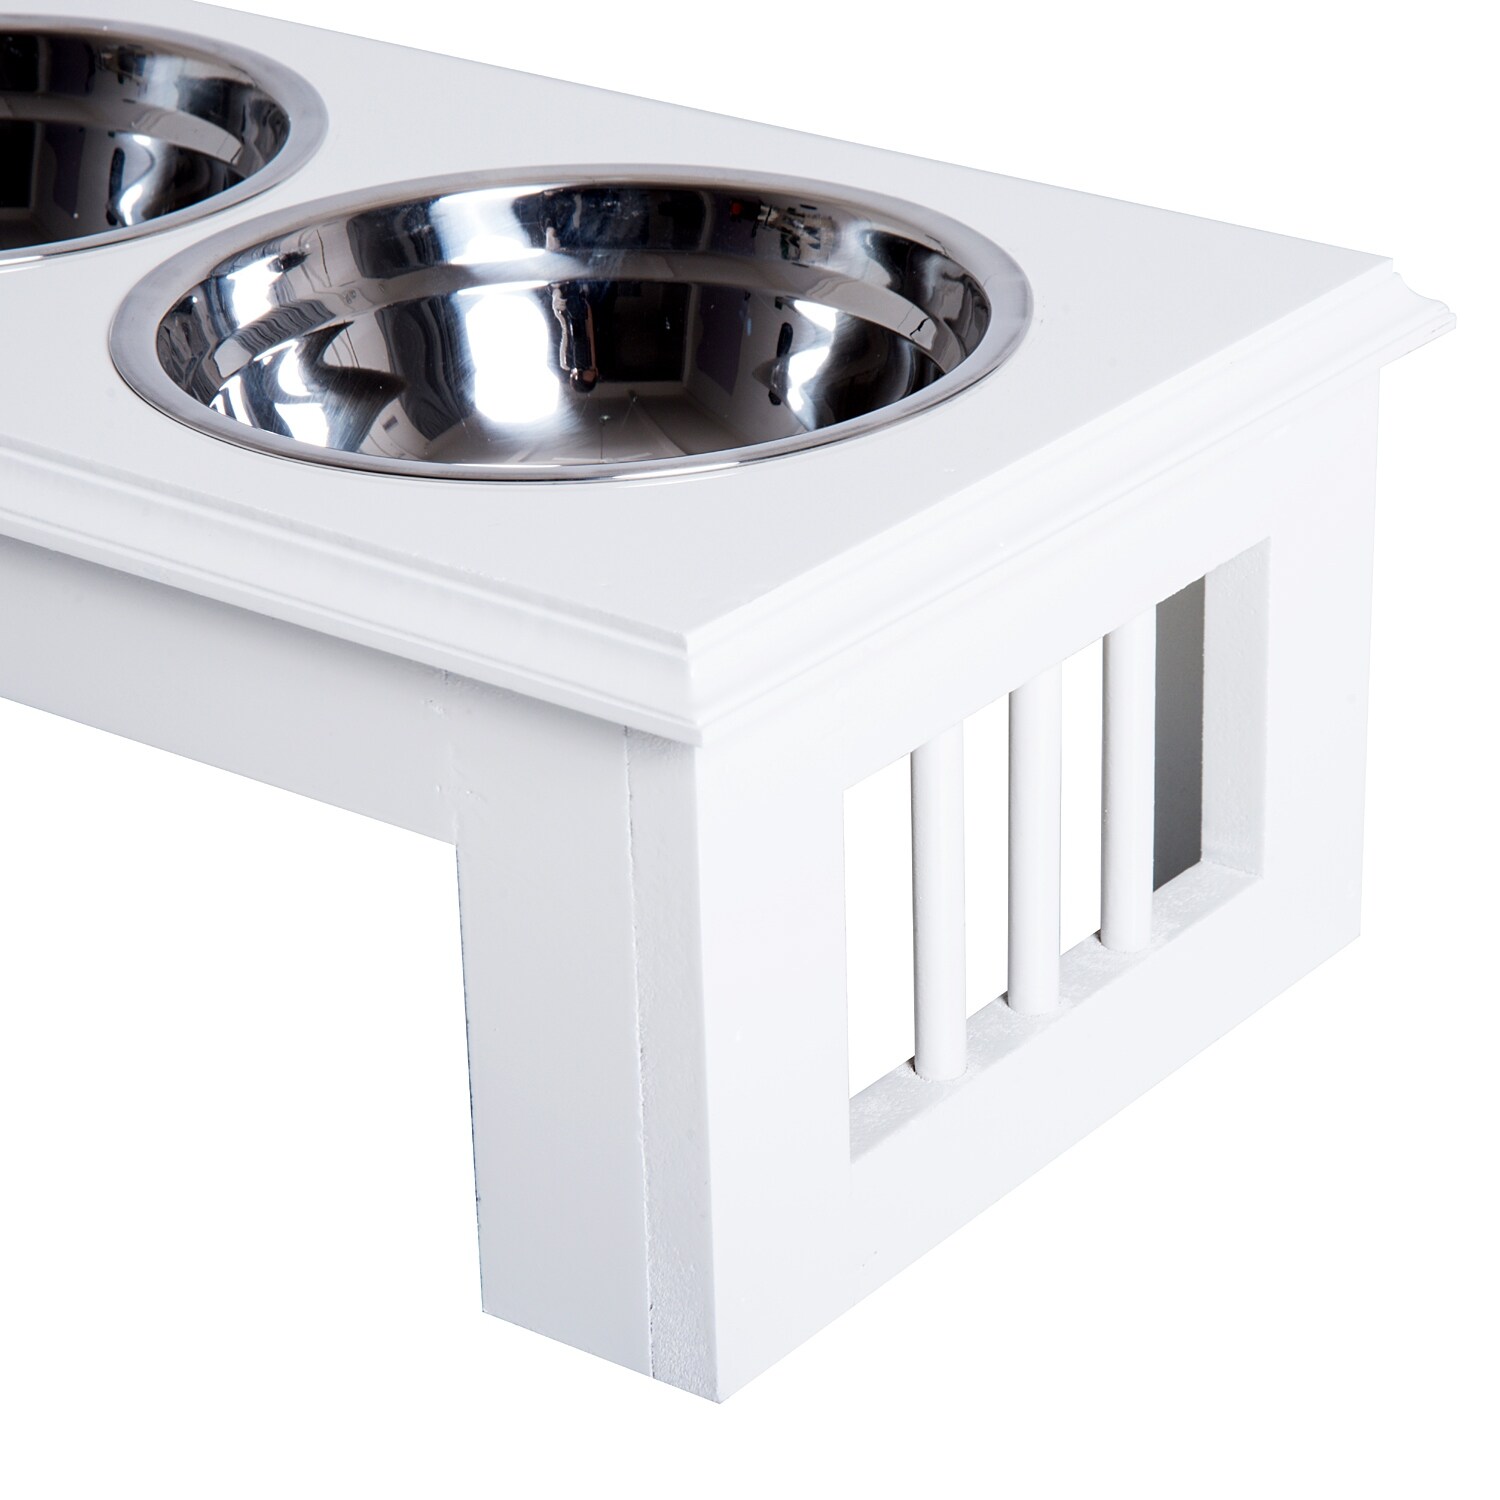 https://ak1.ostkcdn.com/images/products/is/images/direct/2bb4612b82cca8b02feab6ab9e6cecf68de63c5c/PawHut-17%22-Dog-Feeding-Station-with-2-Food-Bowls%2C-White.jpg